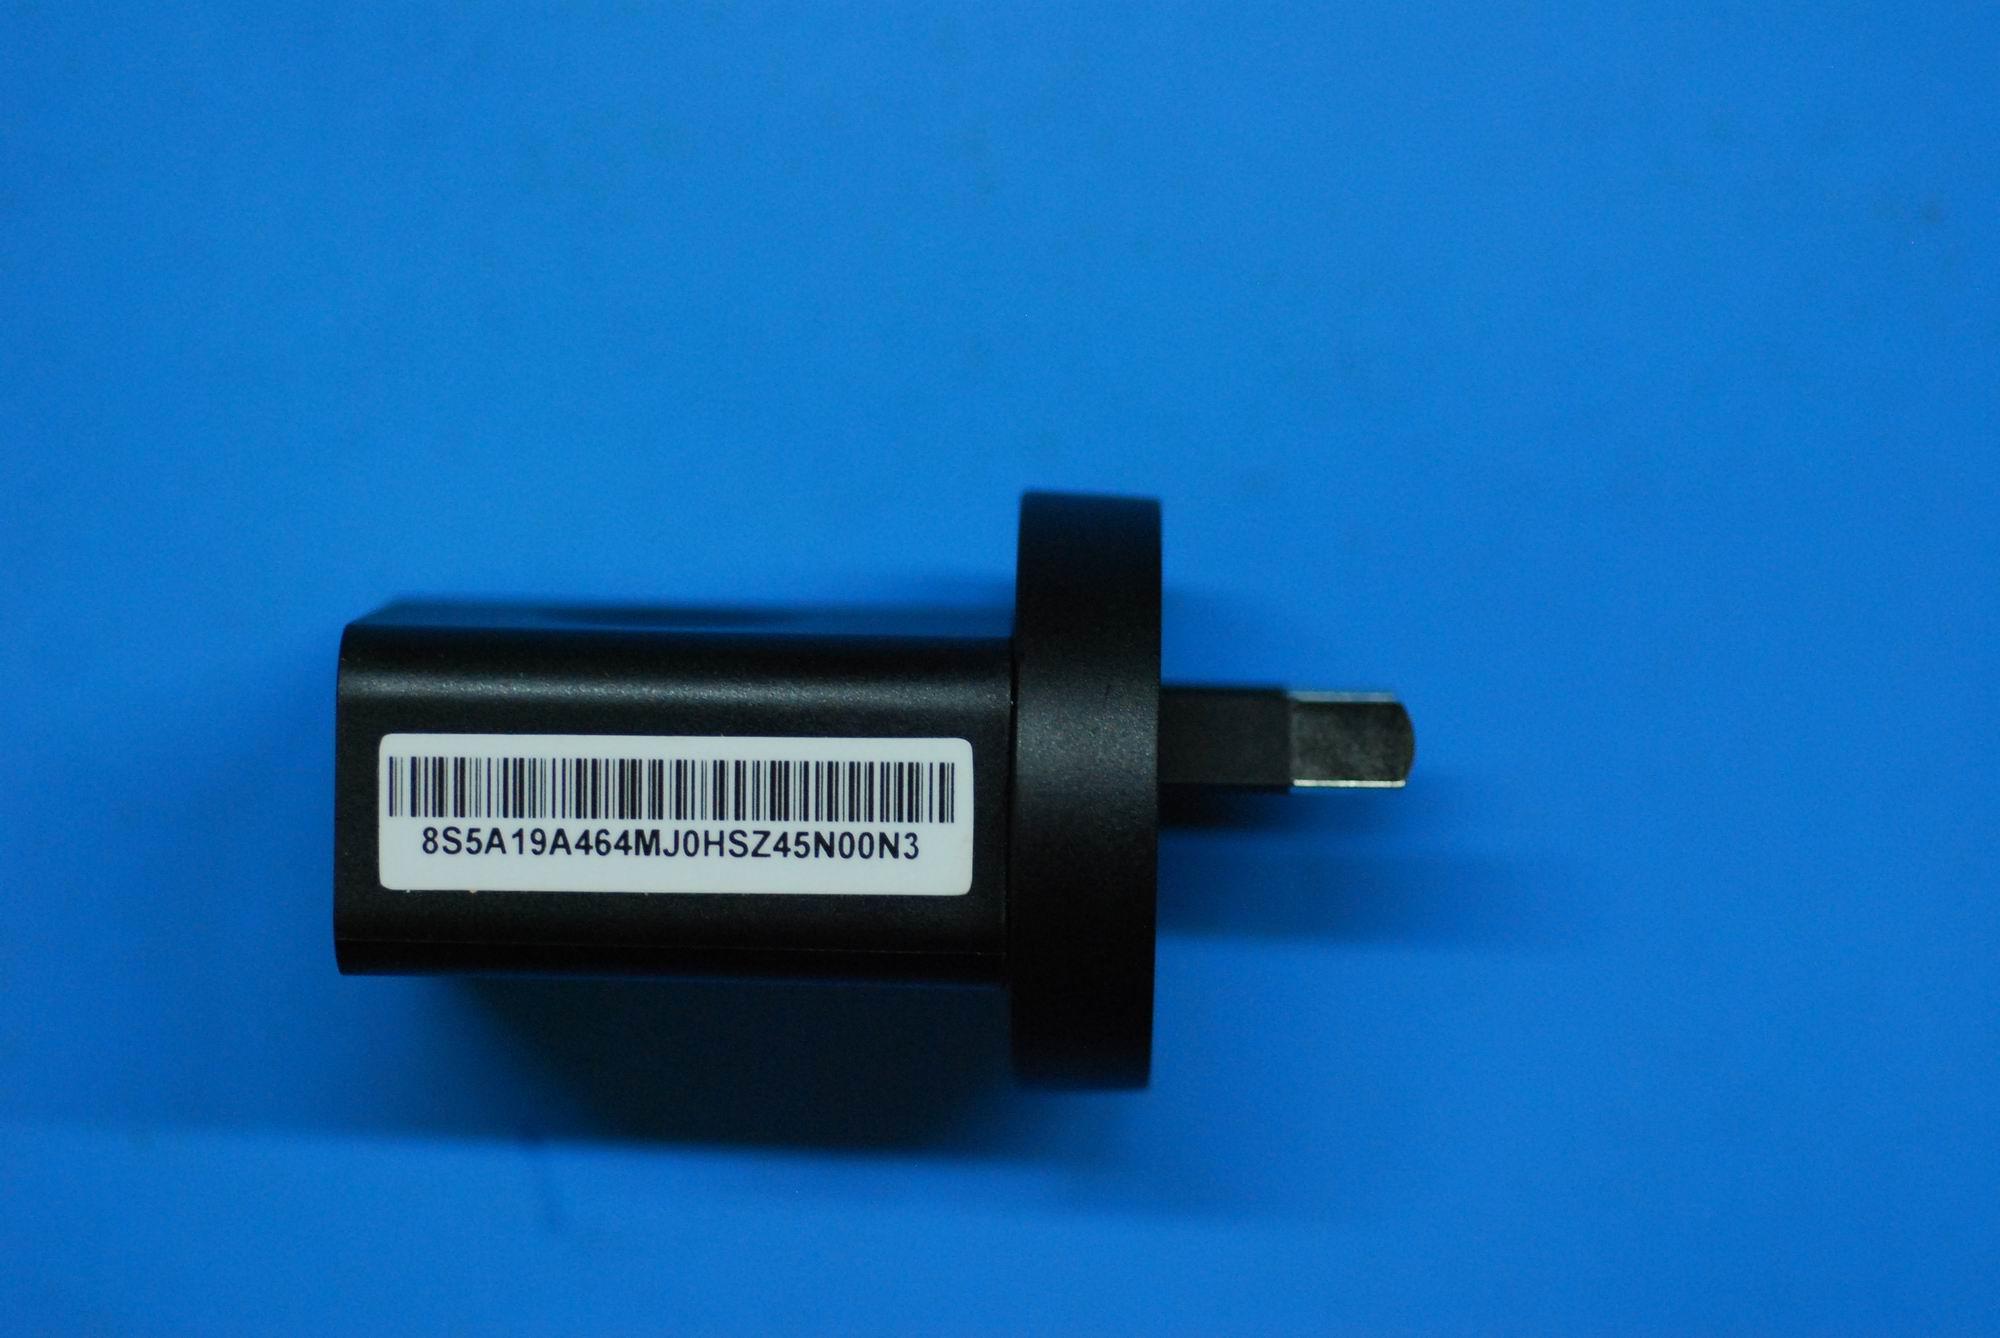 Lenovo TAB 3 Charger/Adapter - 5A19A464MJ